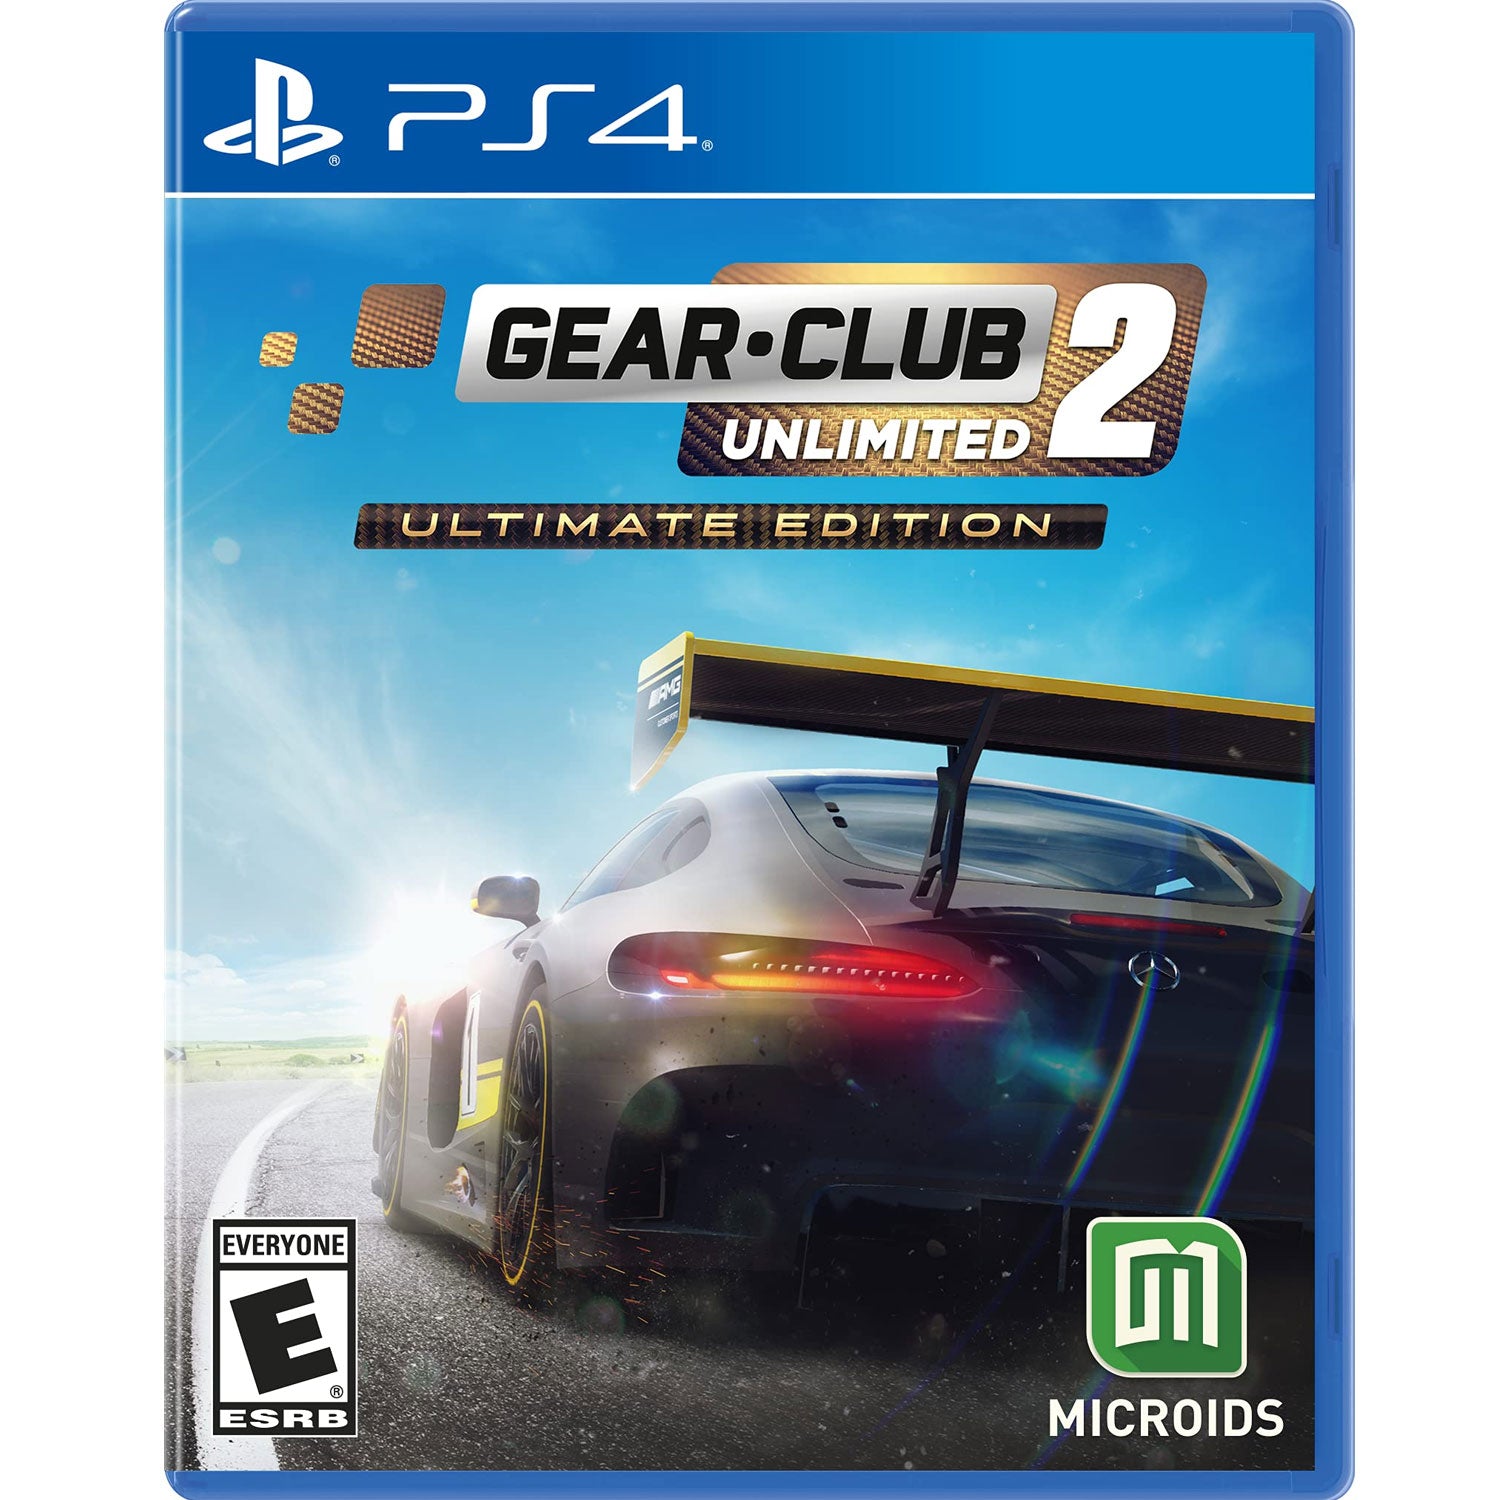 PS4 Gear.Club Unlimited 2 [Ultimate Edition]